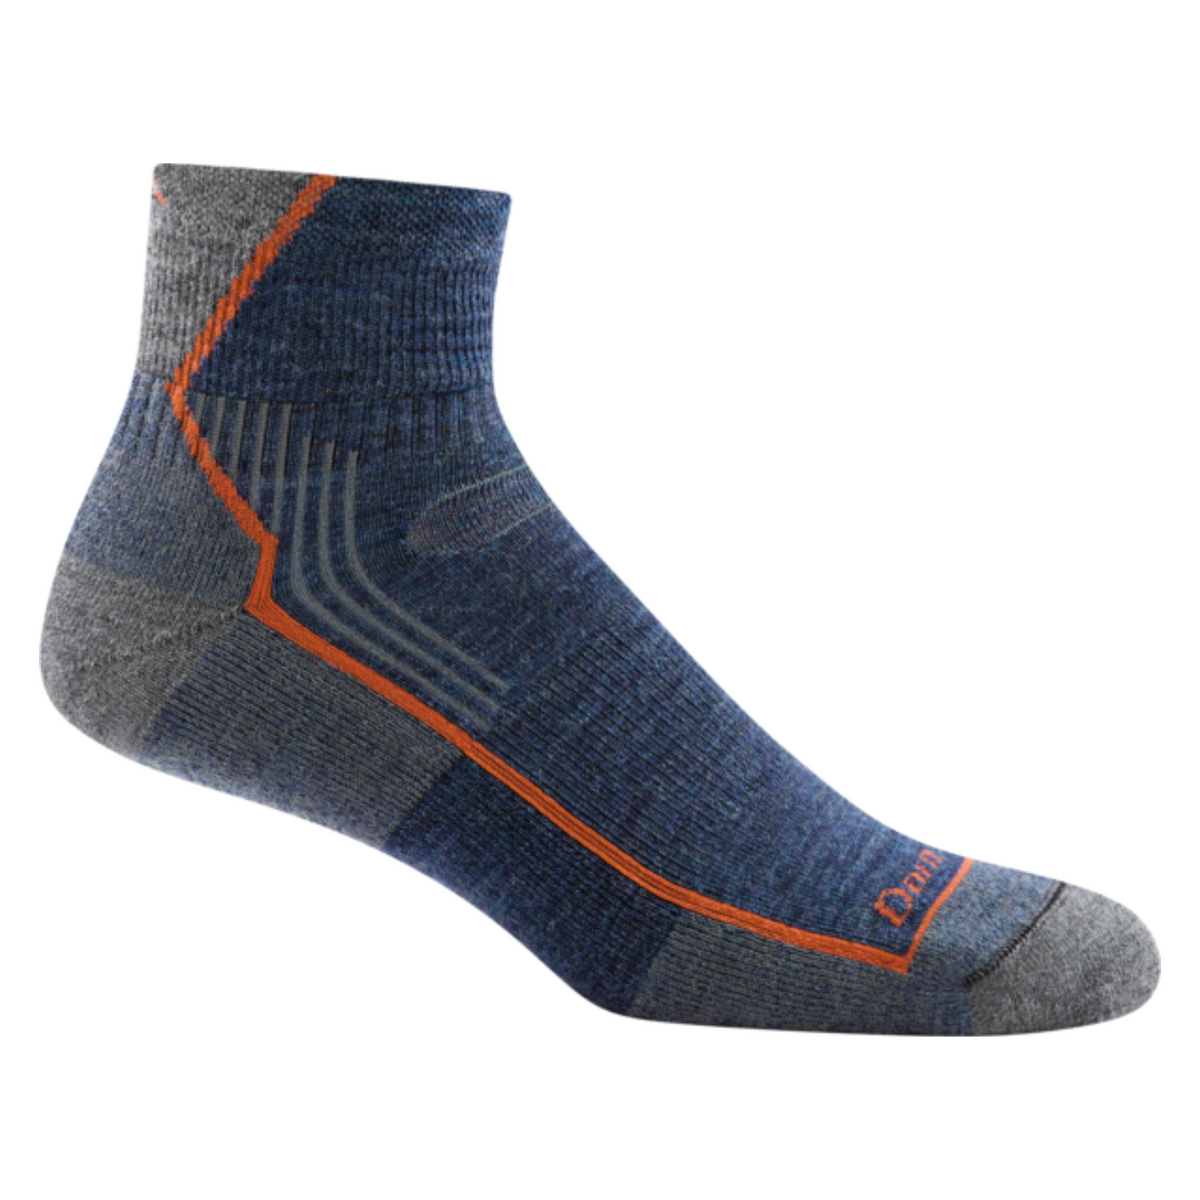 Darn Tough 1959 Quarter Height Midweight with Cushion Hike Men&#39;s Sock in blue on display from side